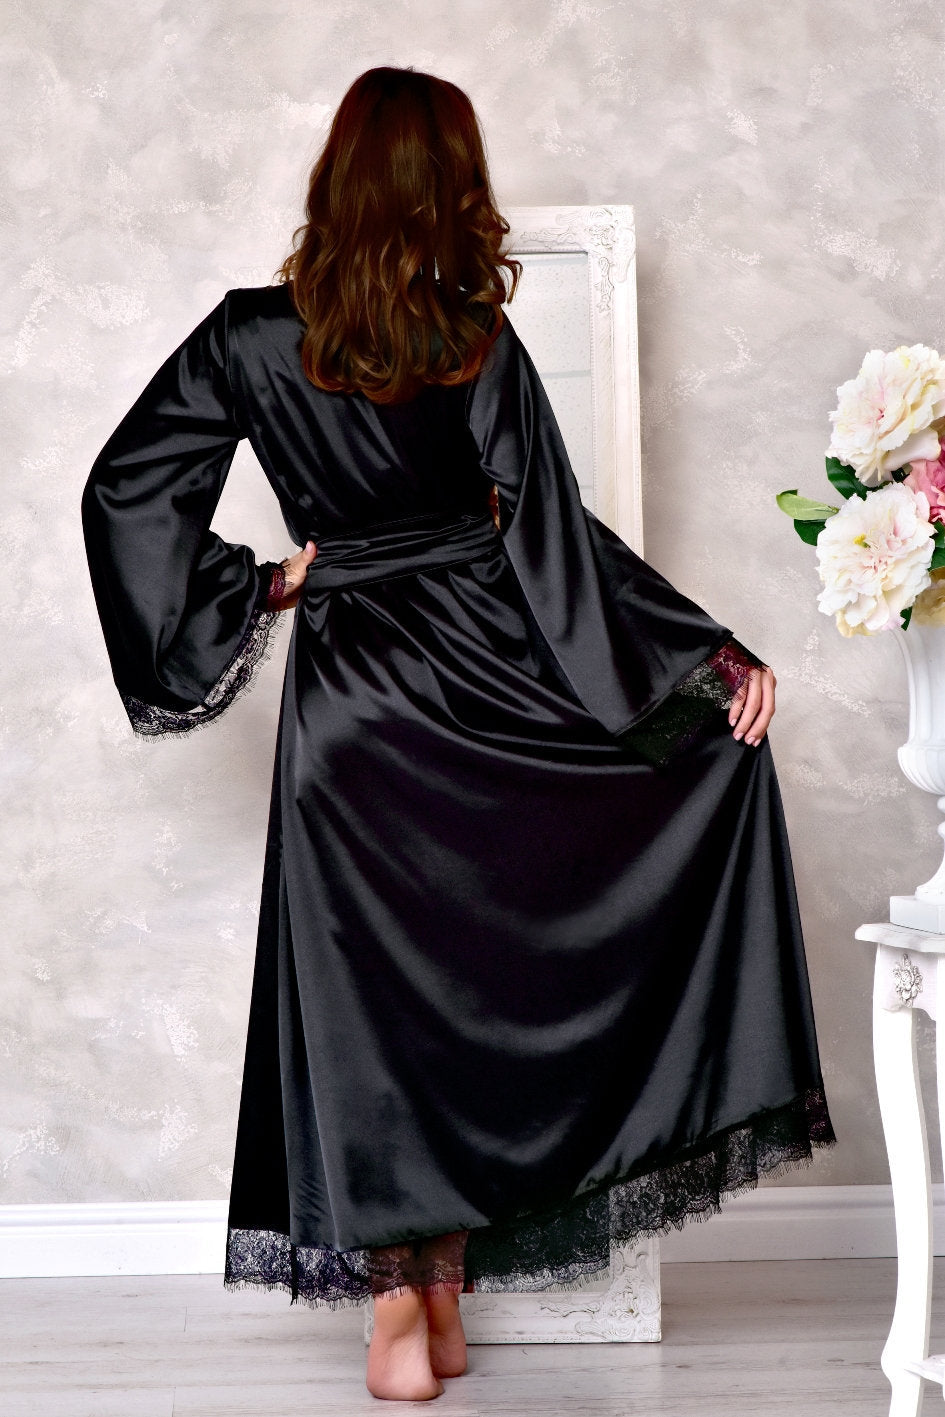 Floor-length black robe with kimono-style sleeves, ideal for a romantic photoshoot